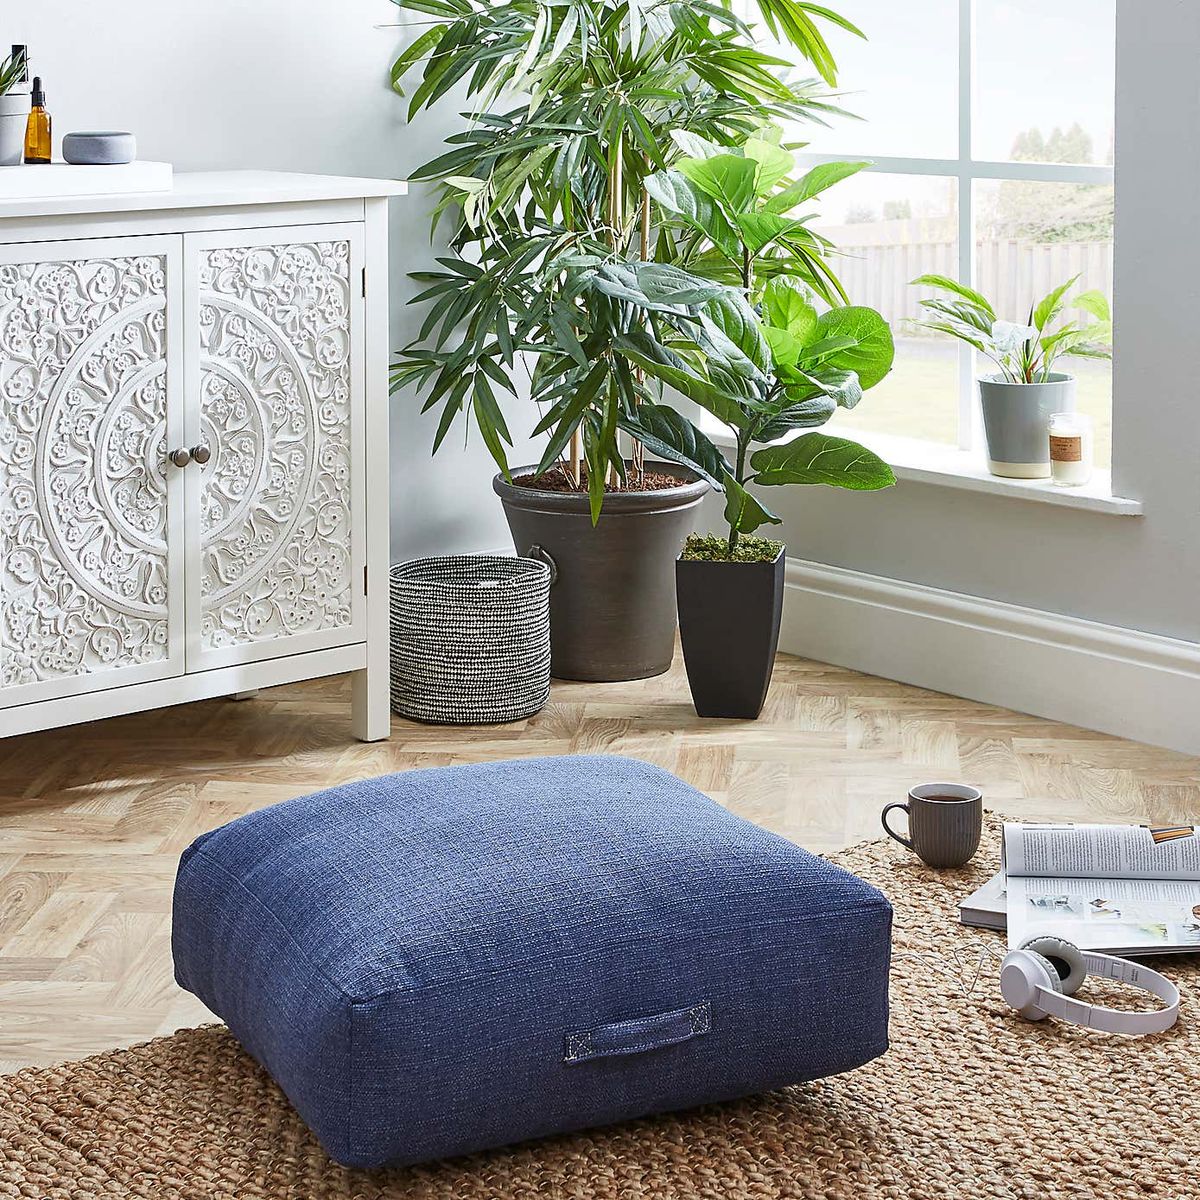 Floor Cushions - 11 Styles To Help You Lounge Comfortably